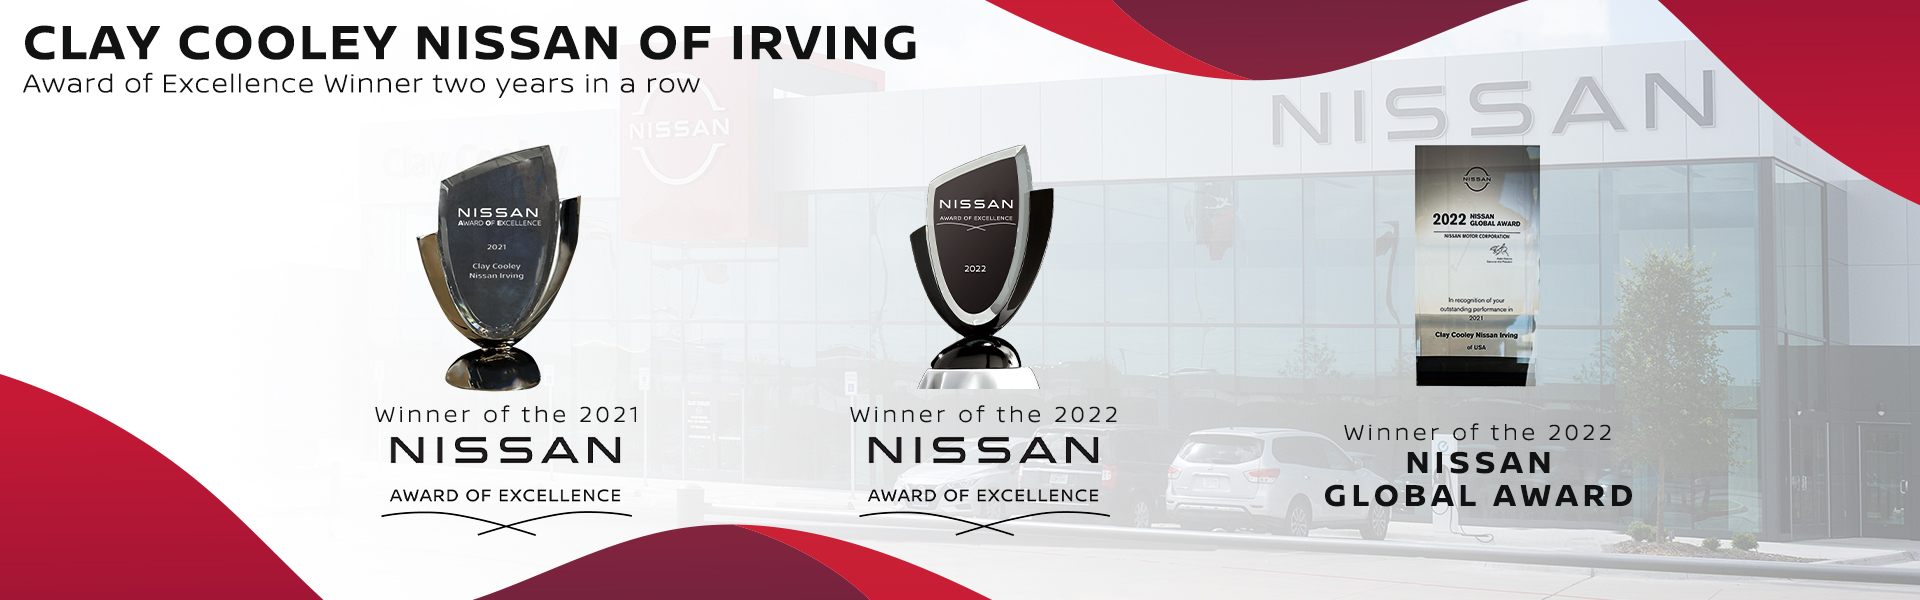 Clay Cooley and Hector Lebron receiving the 2022 Nissan Award of Excellence